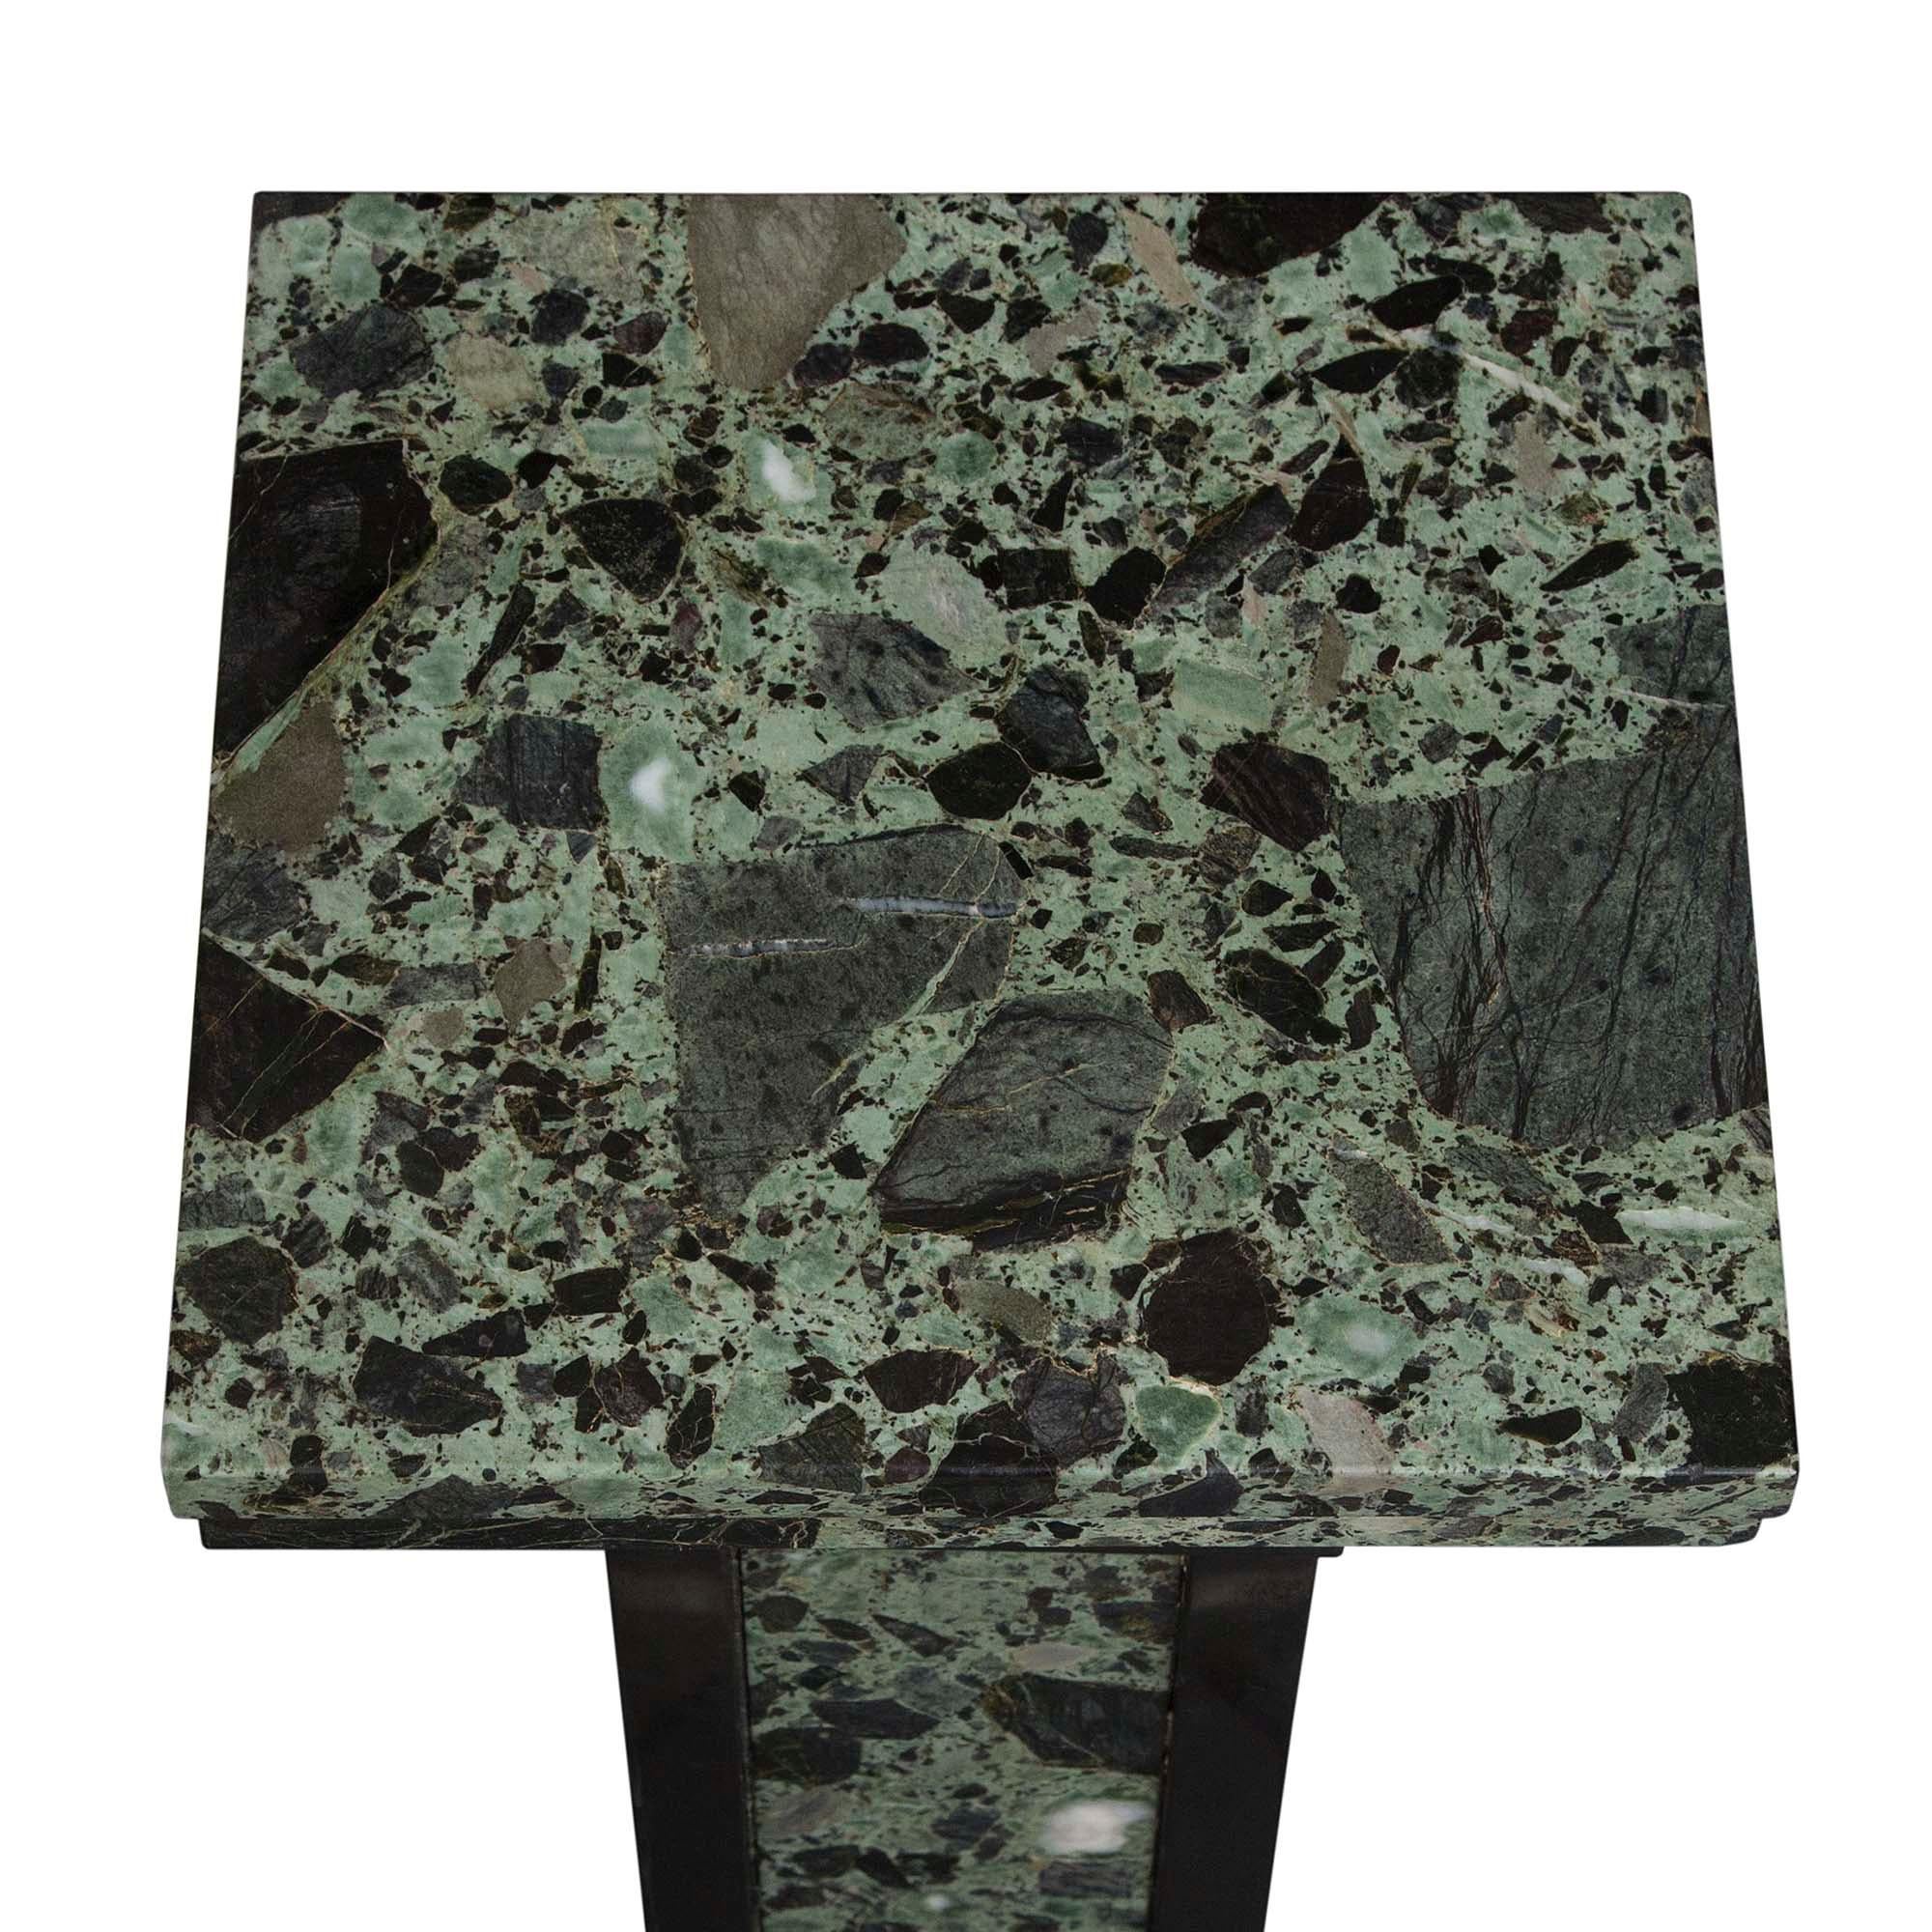 A handsome Italian 19th century XVI st. Verde Antico marble and black Belgian marble pedestal with a swivel top. The pedestal or column is raised by a square base with a rounded top border. The square central support displays a most attractive black